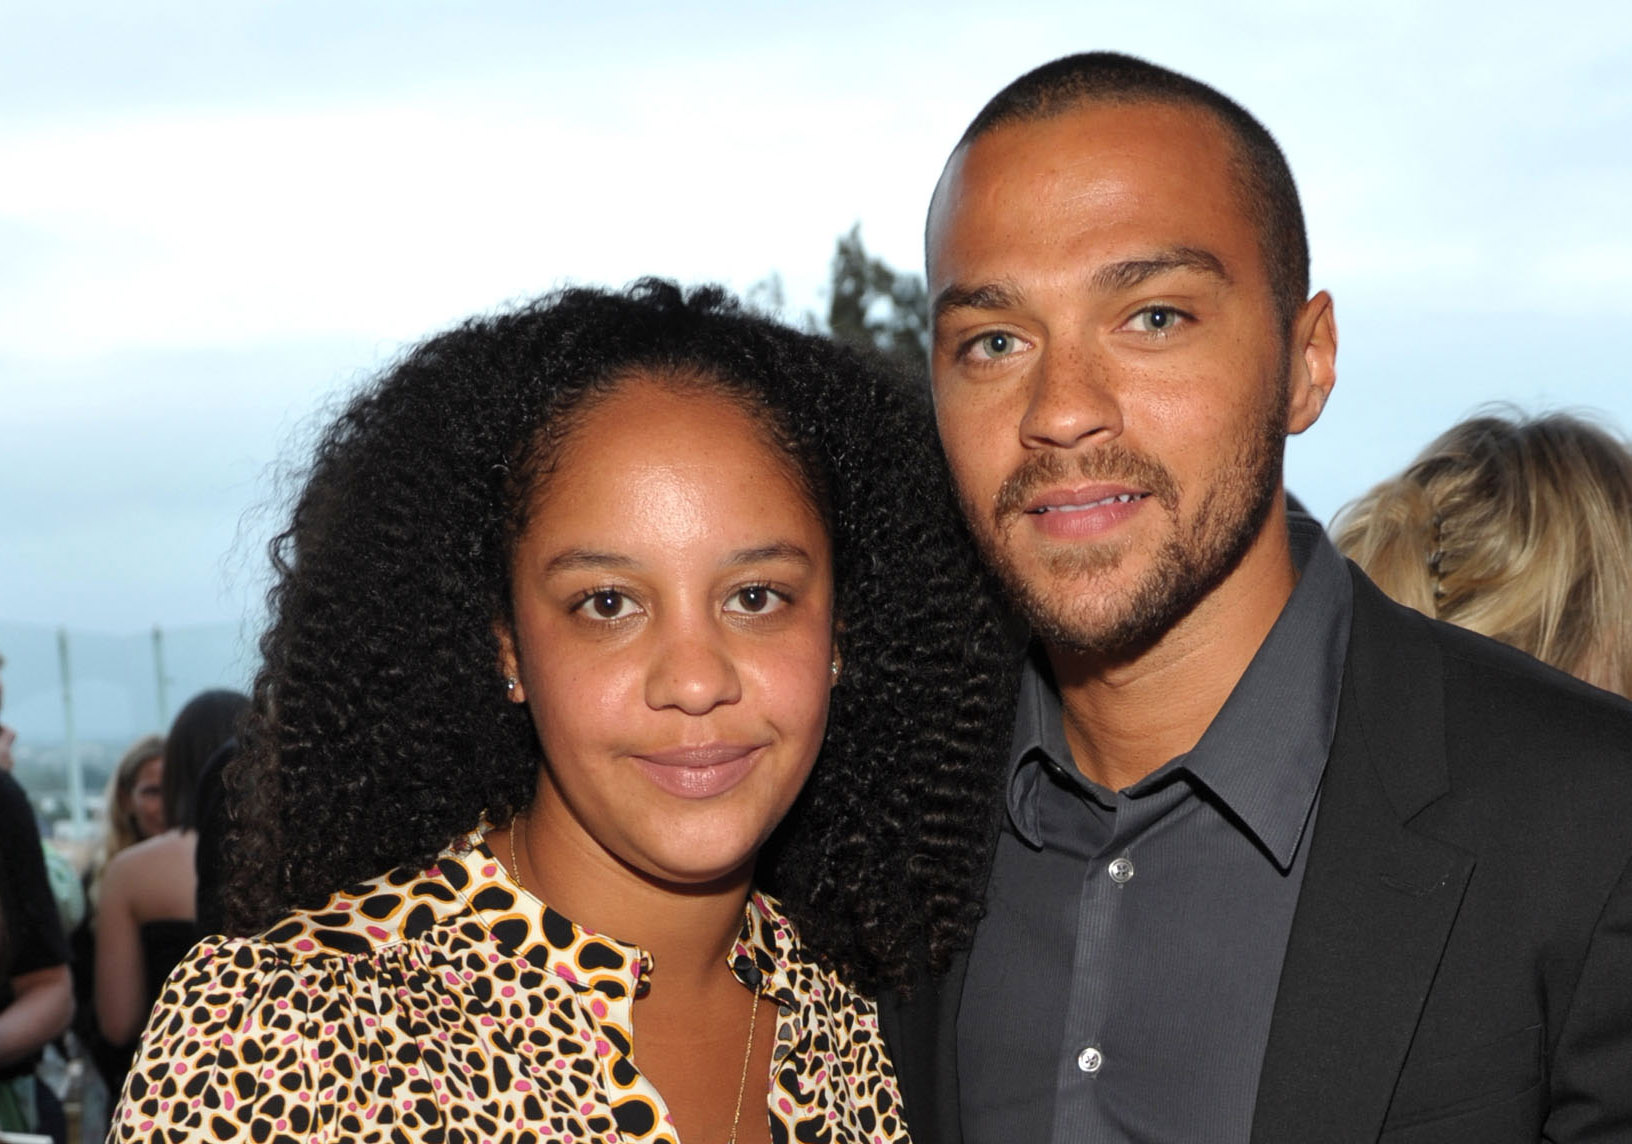 WEST HOLLYWOOD, CA - JUNE 08: Actor Jesse Williams (R) and Aryn Drake-Lee attend the "GQ, Nautica, and Oceana World Oceans Day Party" at Sunset Tower on June 8, 2010 in West Hollywood, California. (Photo by John Shearer/Getty Images for GQ Magazine)